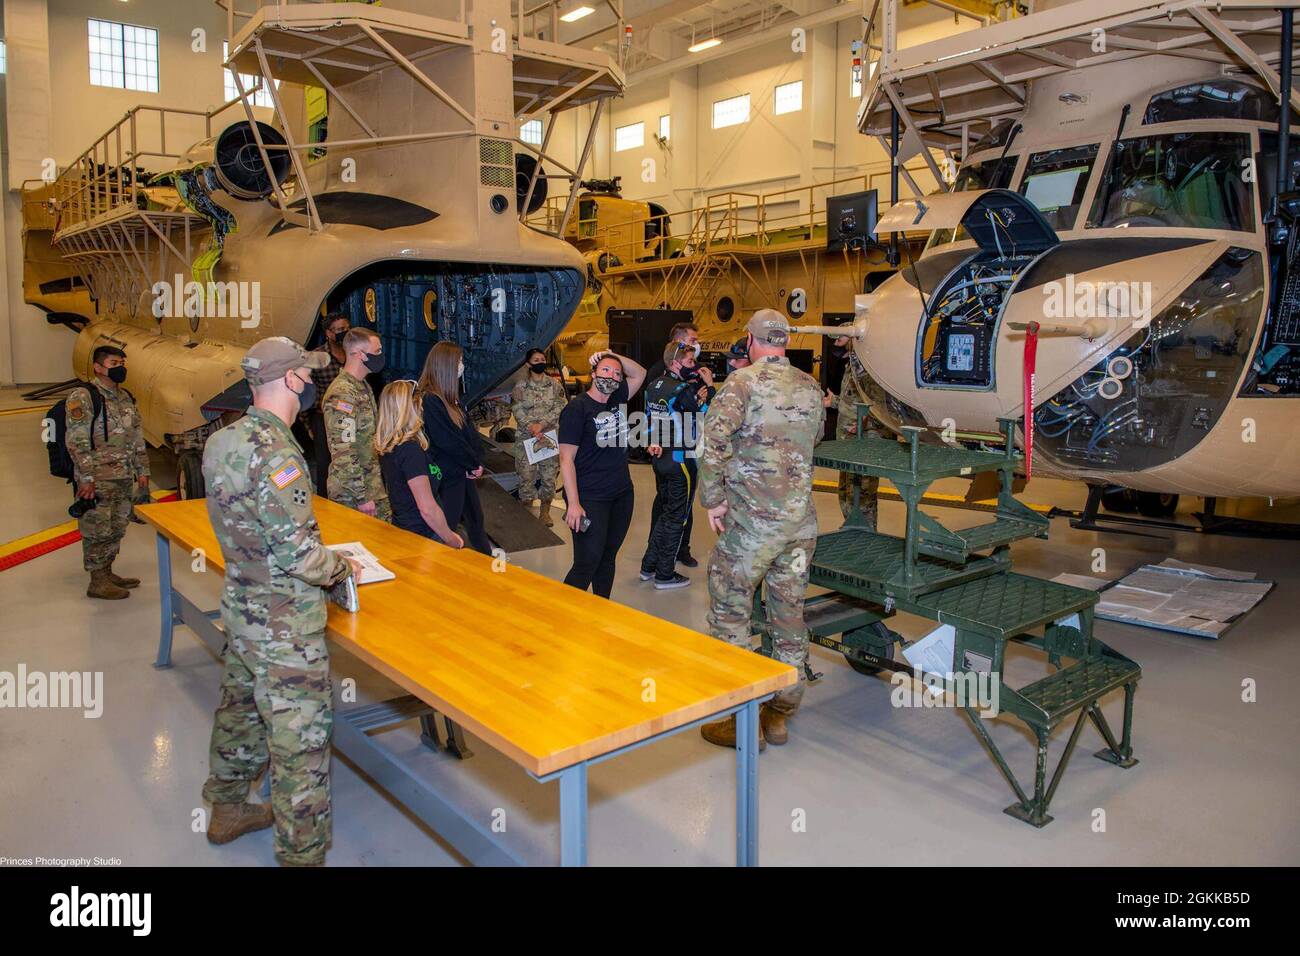 U. S. Army Soldiers assigned to 1st Battalion, 210th Aviation Regiment at Fort Eustis, Virginia, escort NASCAR driver Garrett Smithley and members of the Rick Ware Racing Team through the Company C, 1-210th Aviation hangar May 14, 2021. The team was shown UH-60 Black Hawk and CH-47 Chinook helicopter trainers utilized by over 500 students annually as well as the unit's training capabilities by subject matter experts. Stock Photo